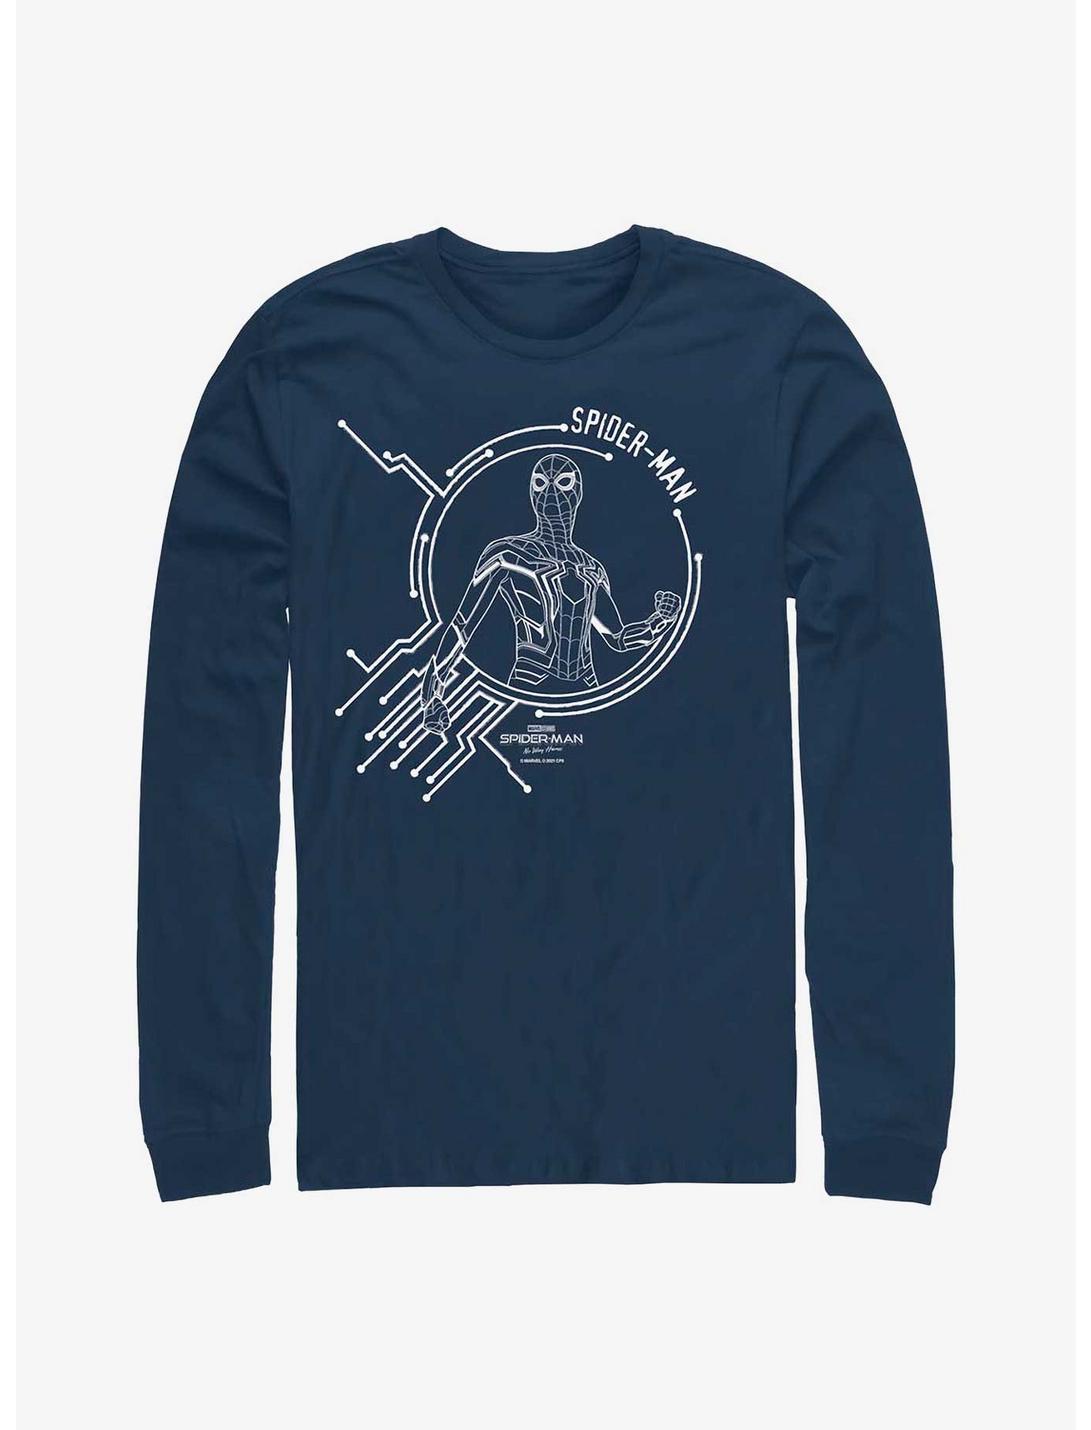 Marvel Spider-Man: No Way Home Spidey Tech Long-Sleeve T-Shirt, NAVY, hi-res